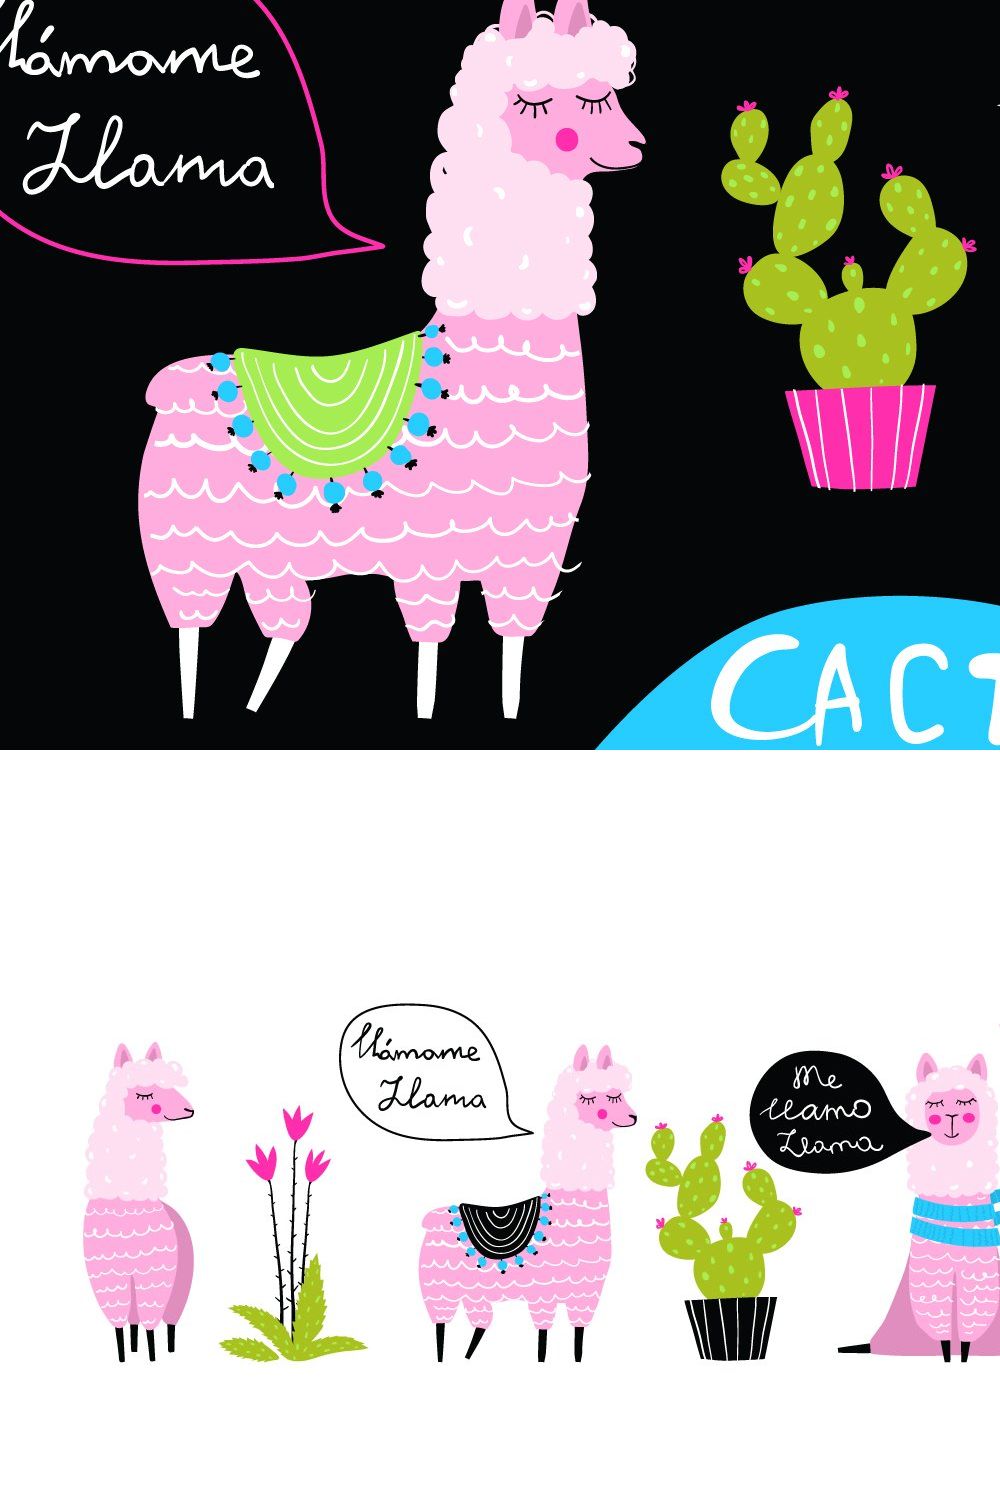 Funny llamas and cacti collection pinterest preview image.